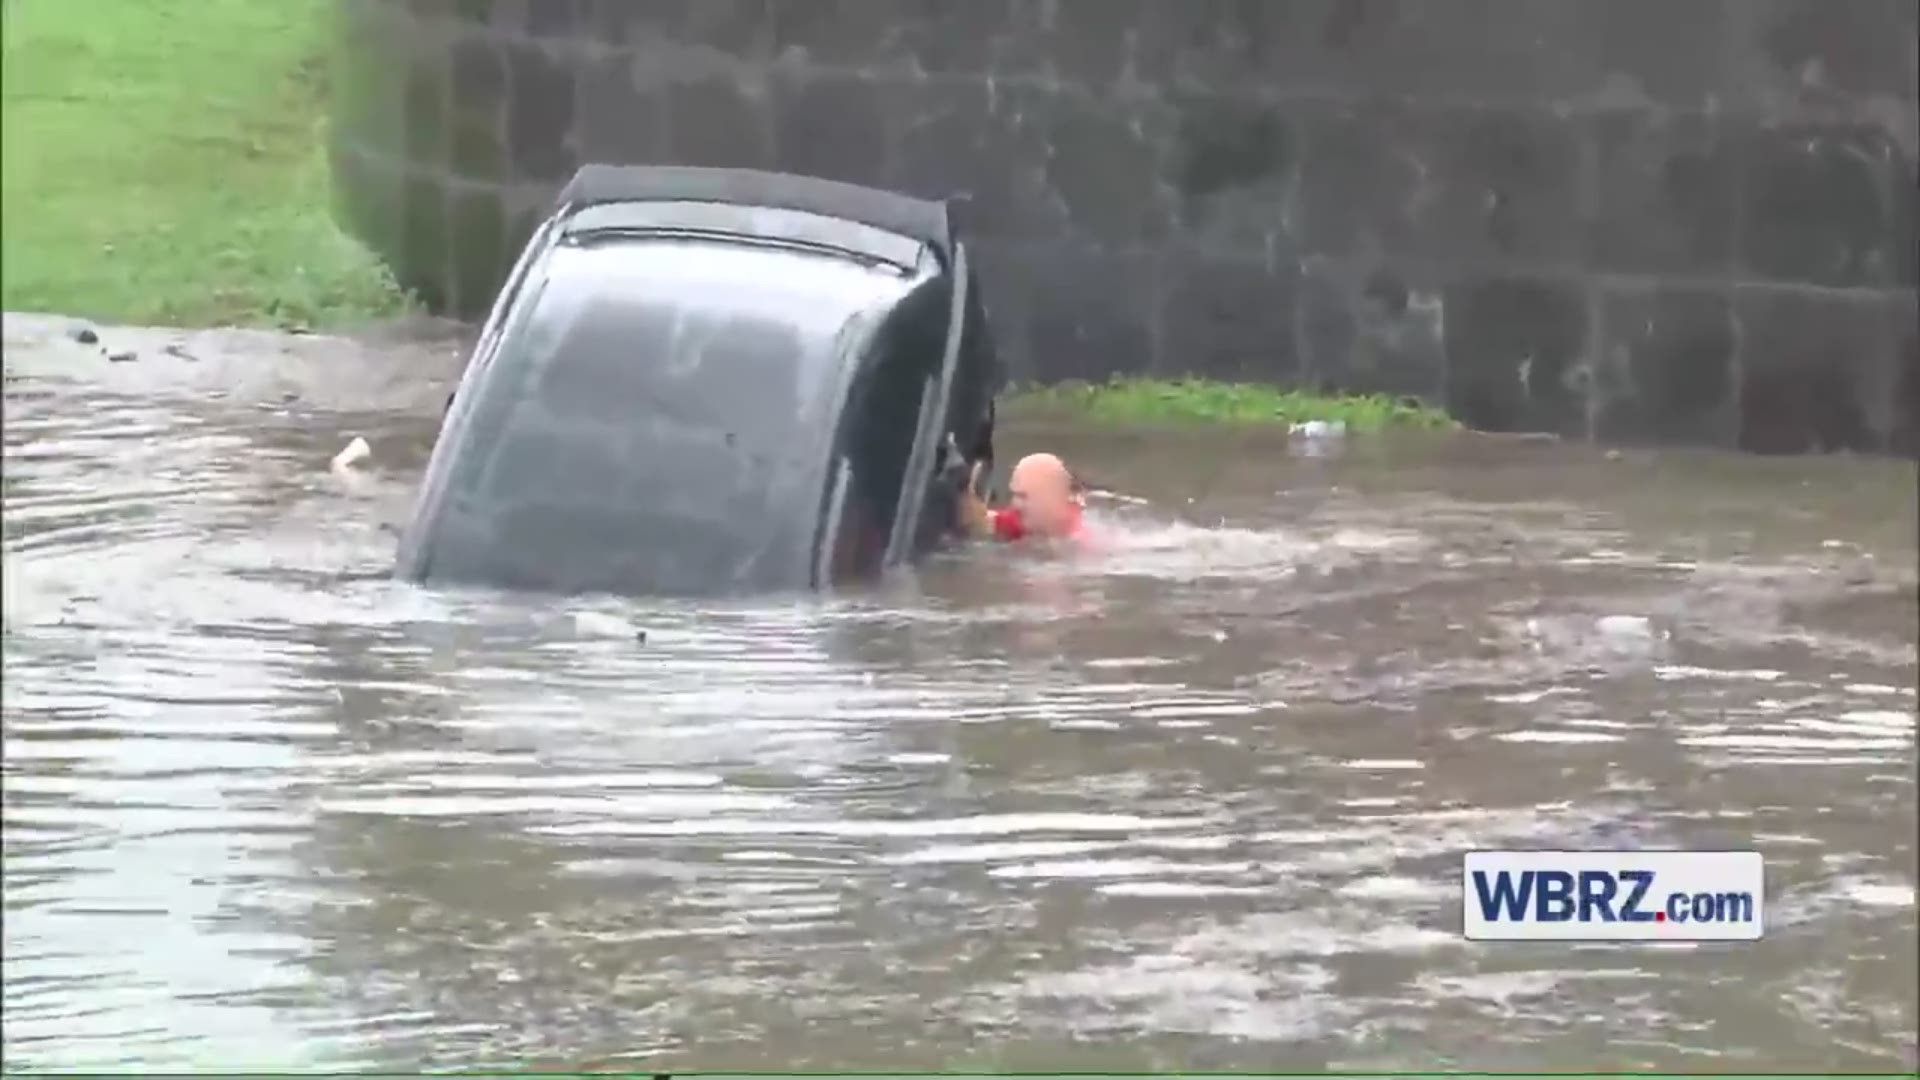 WBRZ video shows firefighters rescuing woman from flooded car